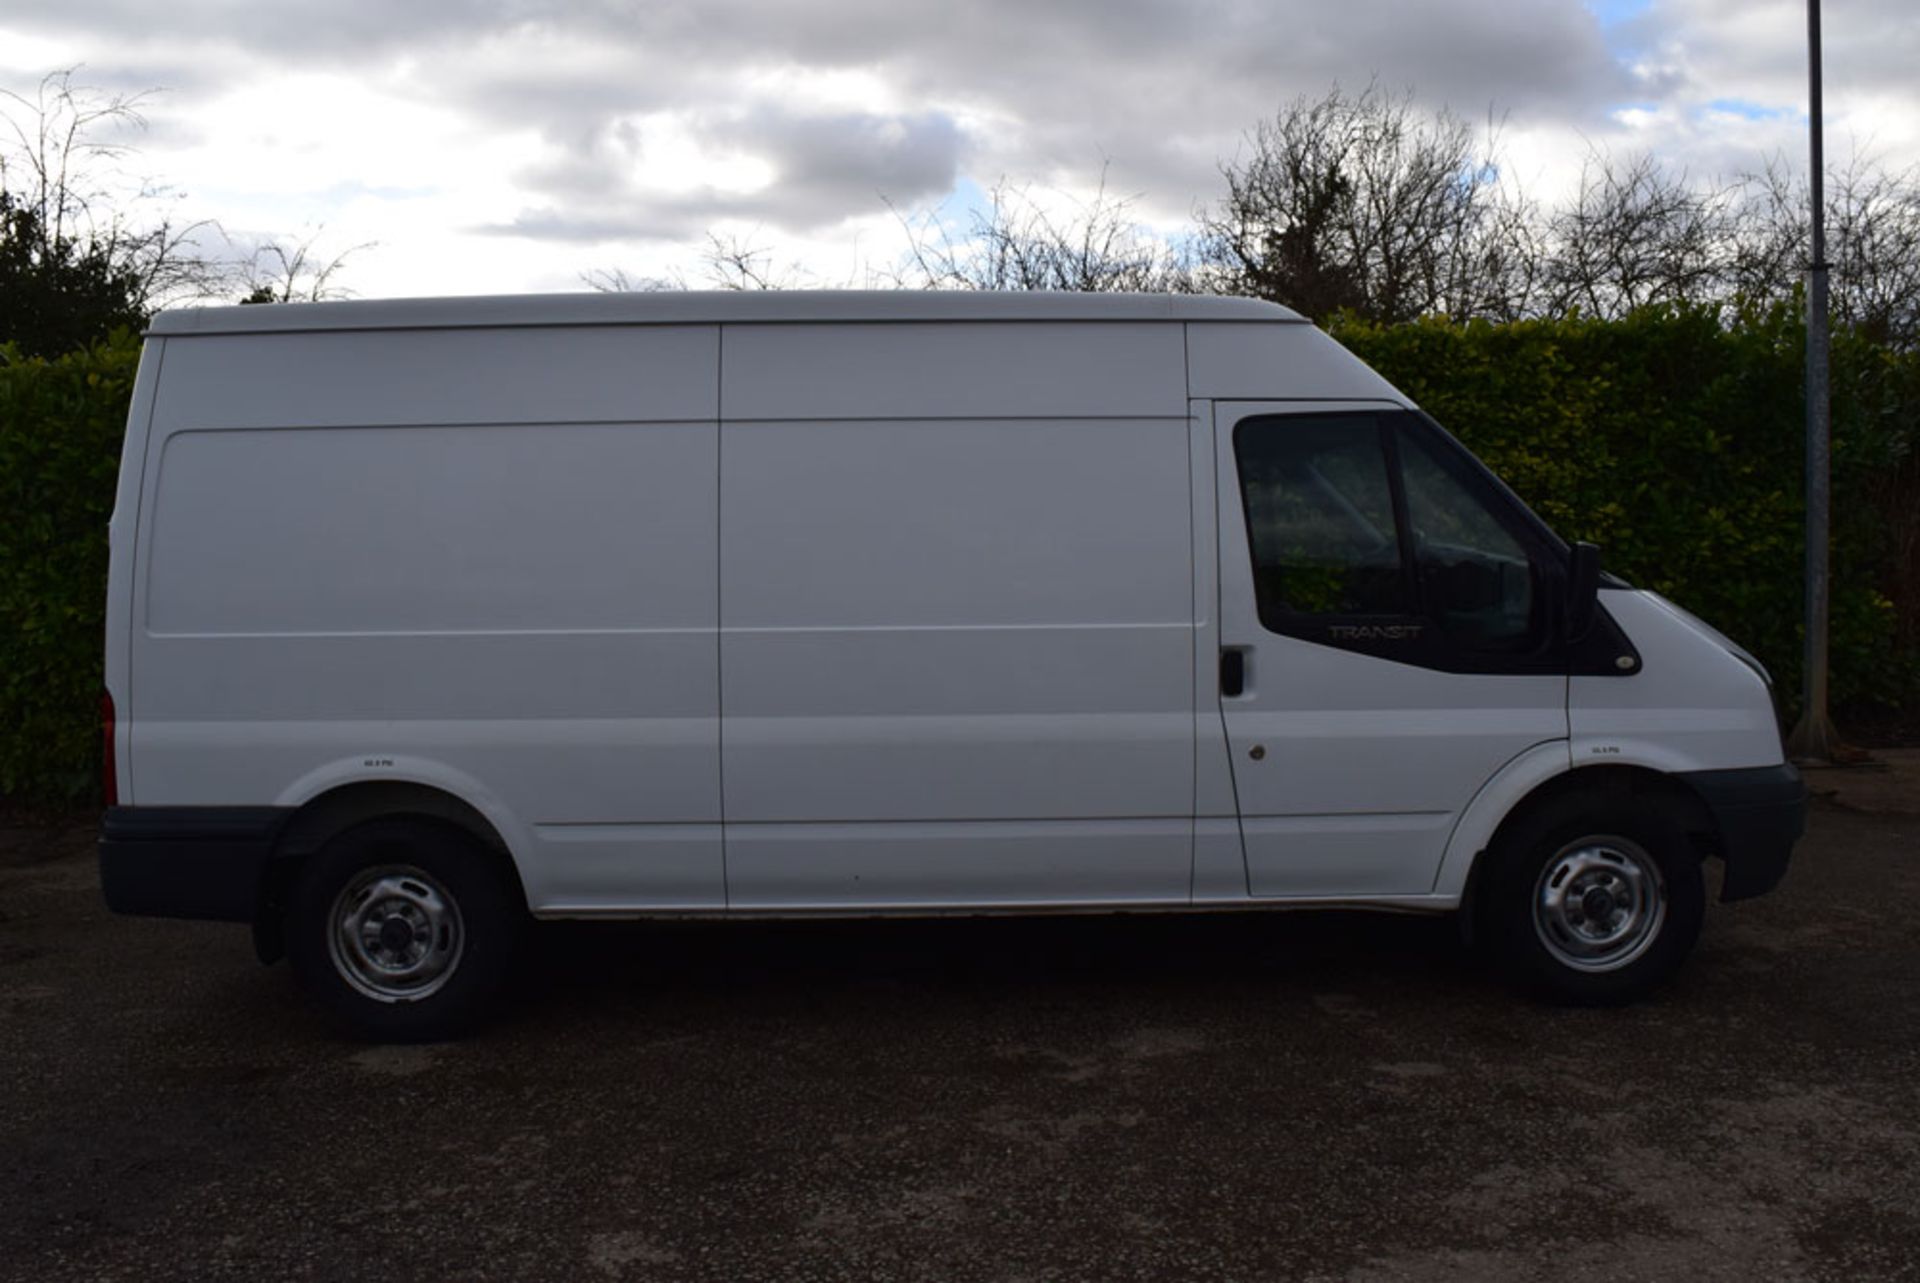 No Reserve 2009 Ford Transit T350 FWD 2.2 115ps Semi High Roof Panel Van - Image 8 of 8